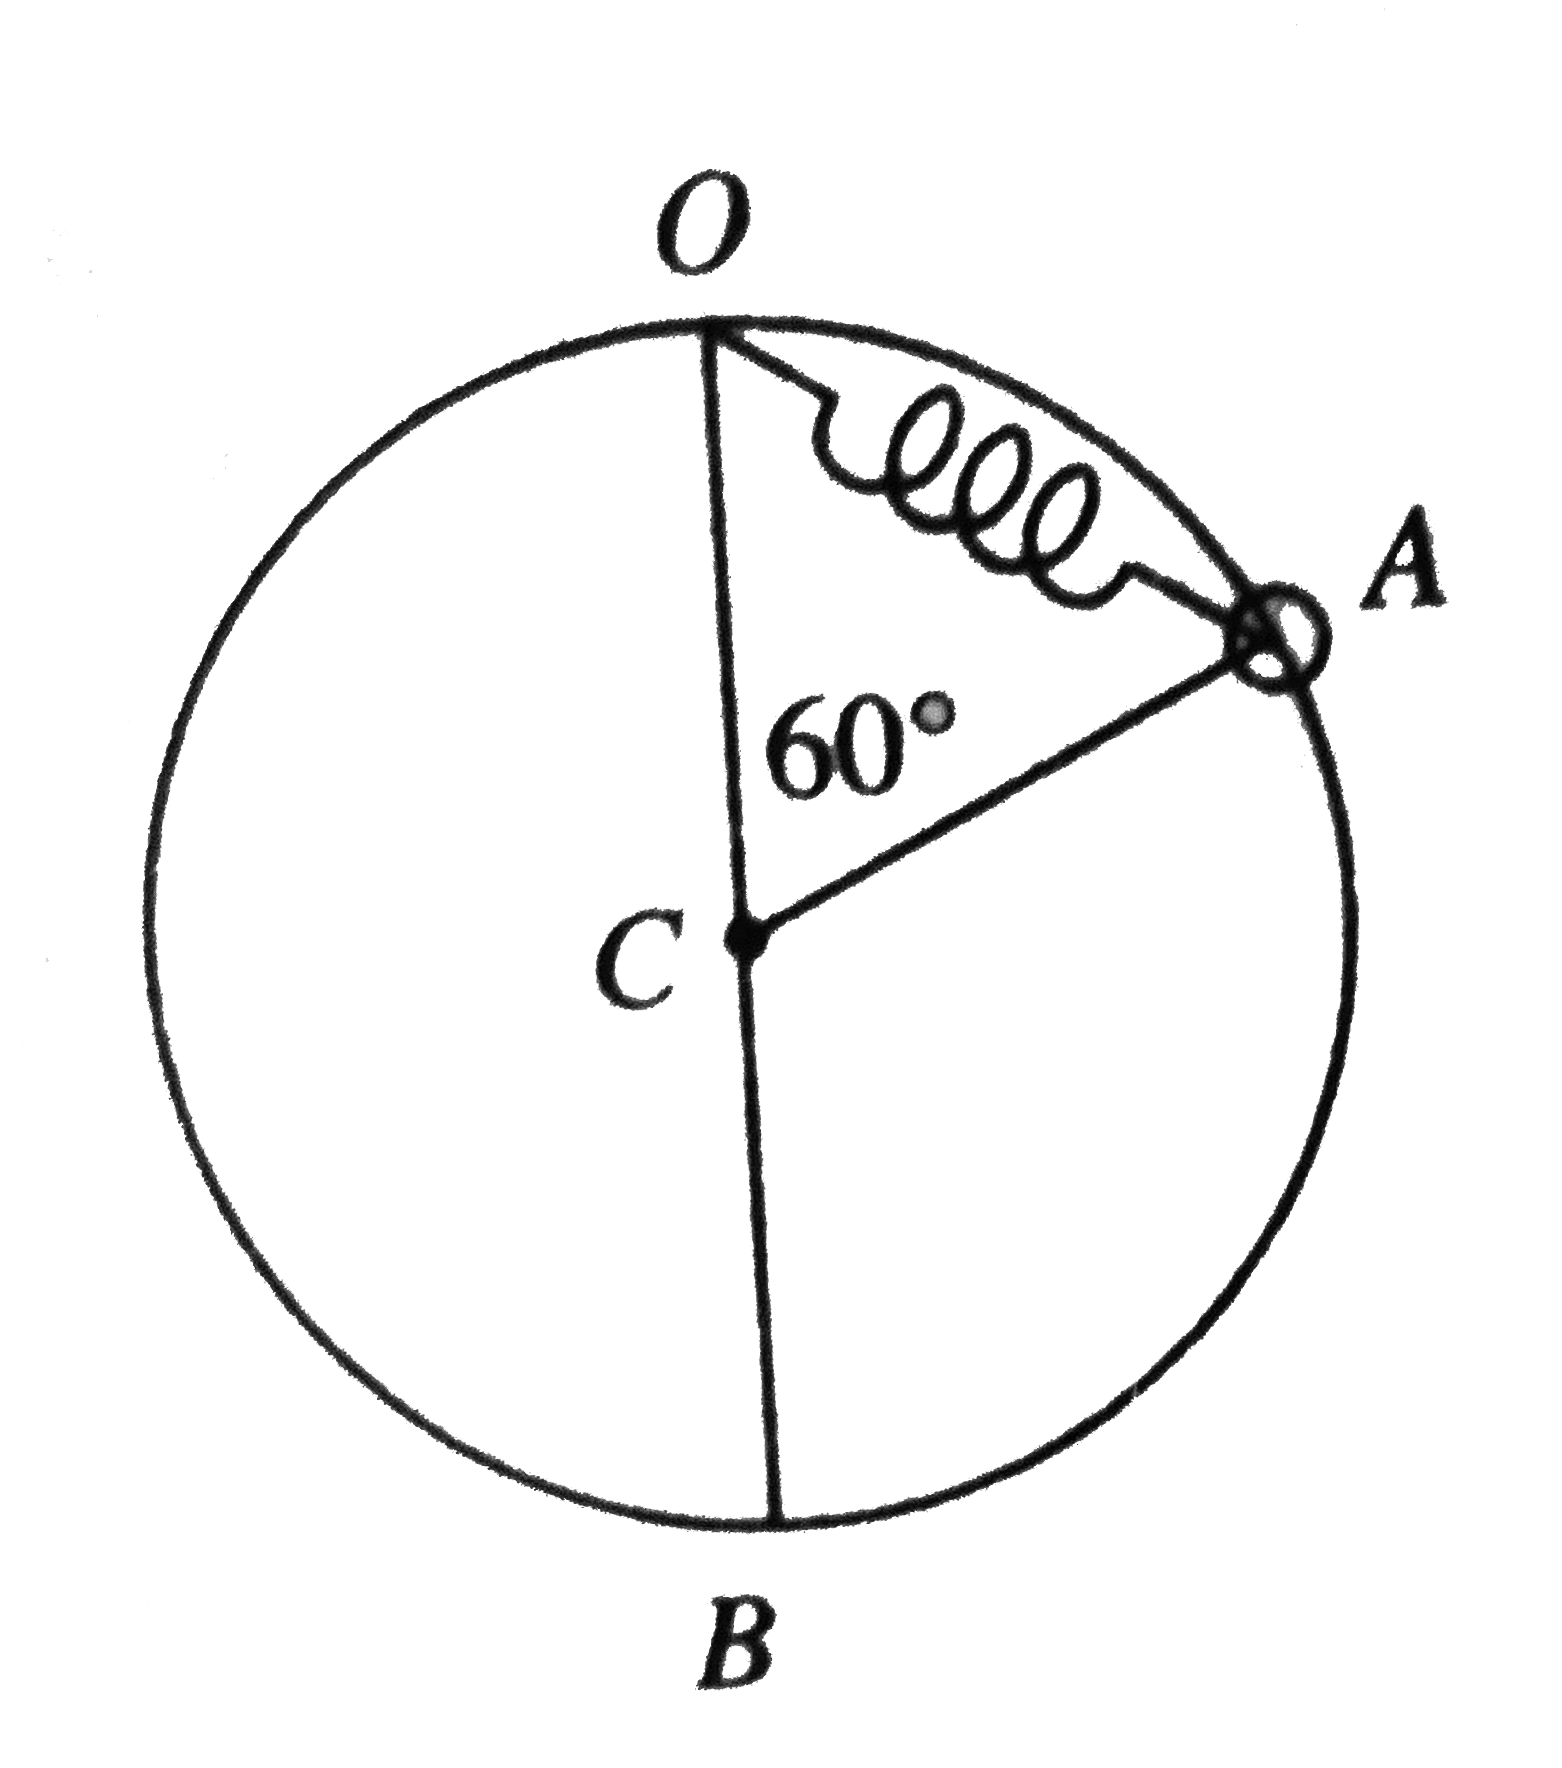 A particle of mass 5kg is free to slide on a smooth ring of radius r=20cm fixed in a vertical plane. The particle is attached to one end of a spring whose other end is fixed to the top point O of the ring. Initially, the particle is at rest at a point A of the ring such that /OCA=60^@, C being the centre of the ring. The natural length of the spring is also equal to r=20cm. After the particle is released and slides down the ring, the contact force between the particle and the ring becomes zero when it reaches the lowest position B. Determine the force constant (i n xx 10^2Nm^-1) of the spring.